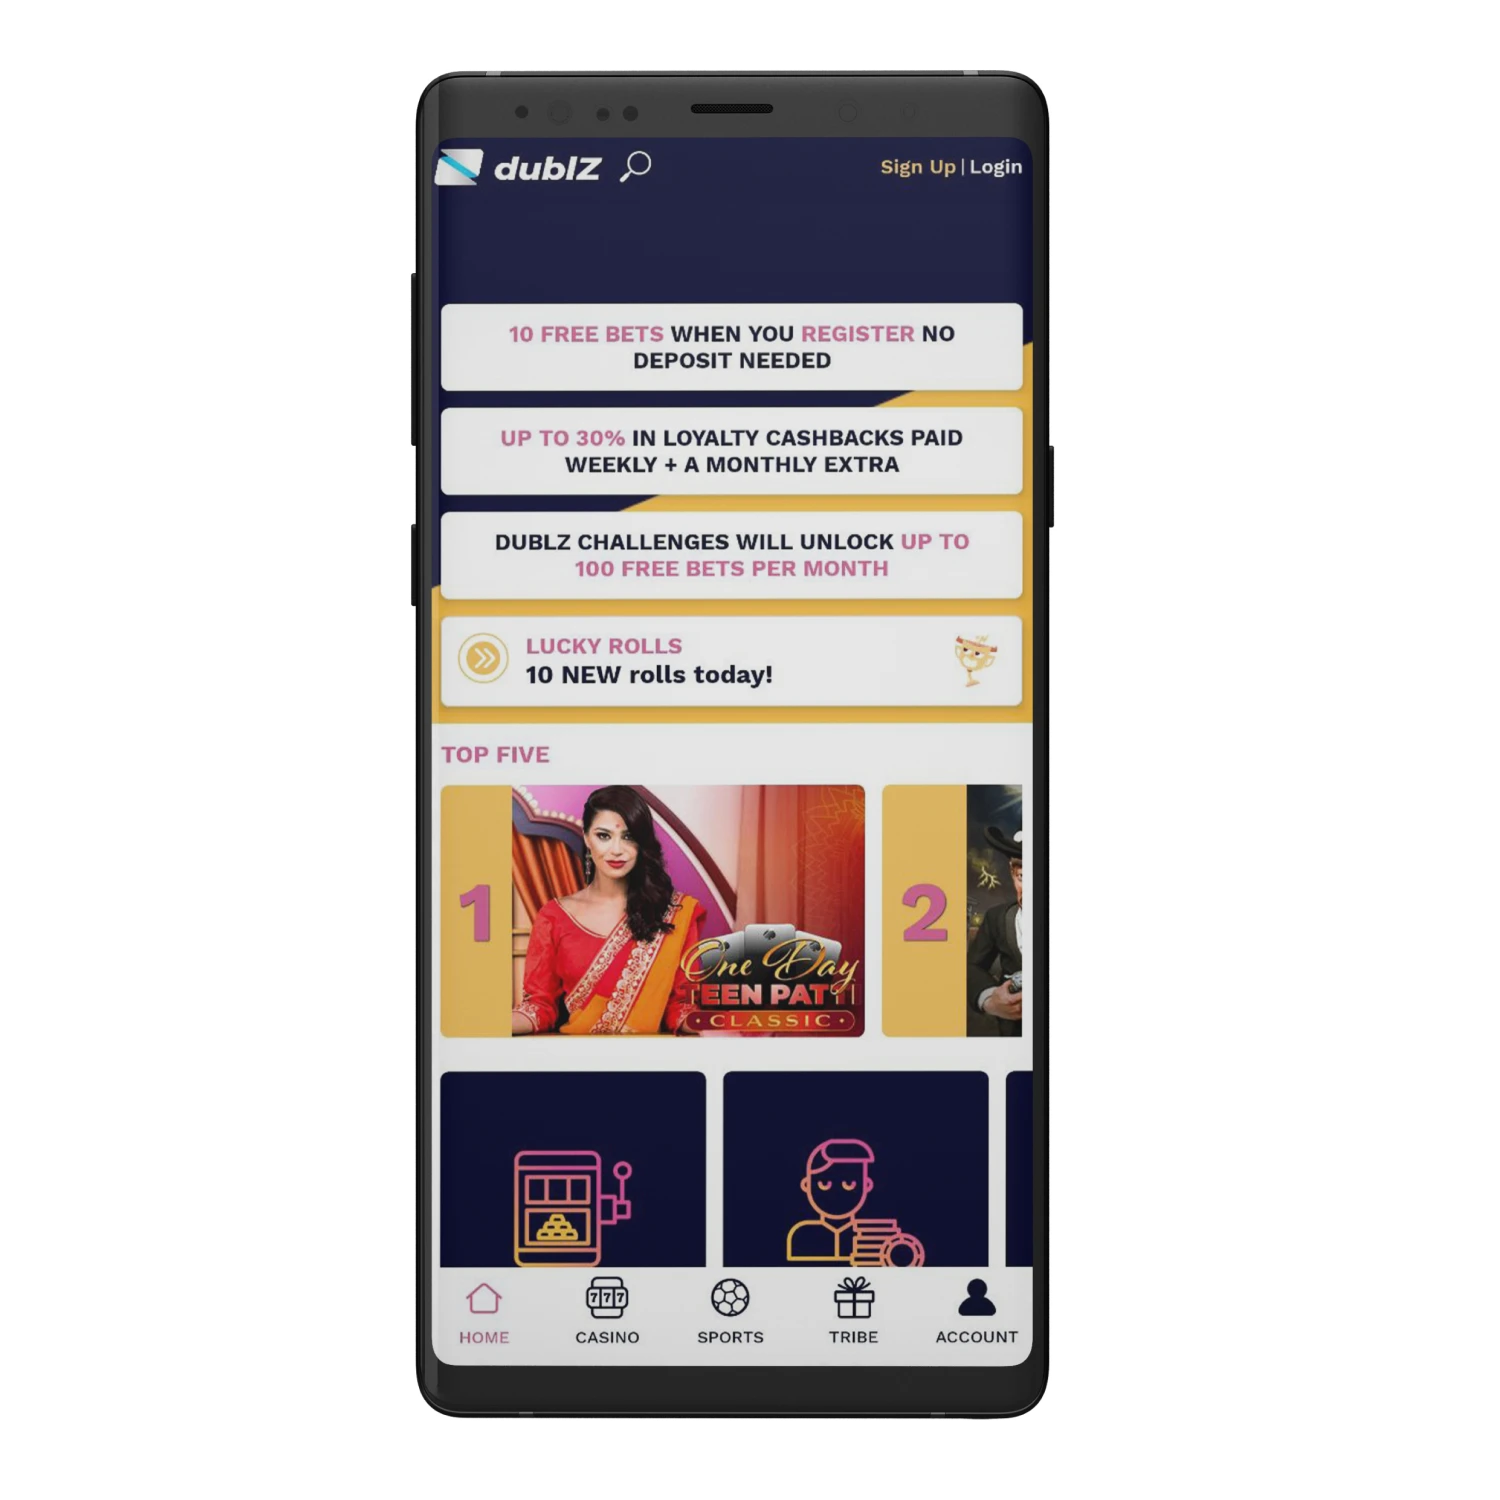 With the Dublz app, bet on sports and play in casinos.